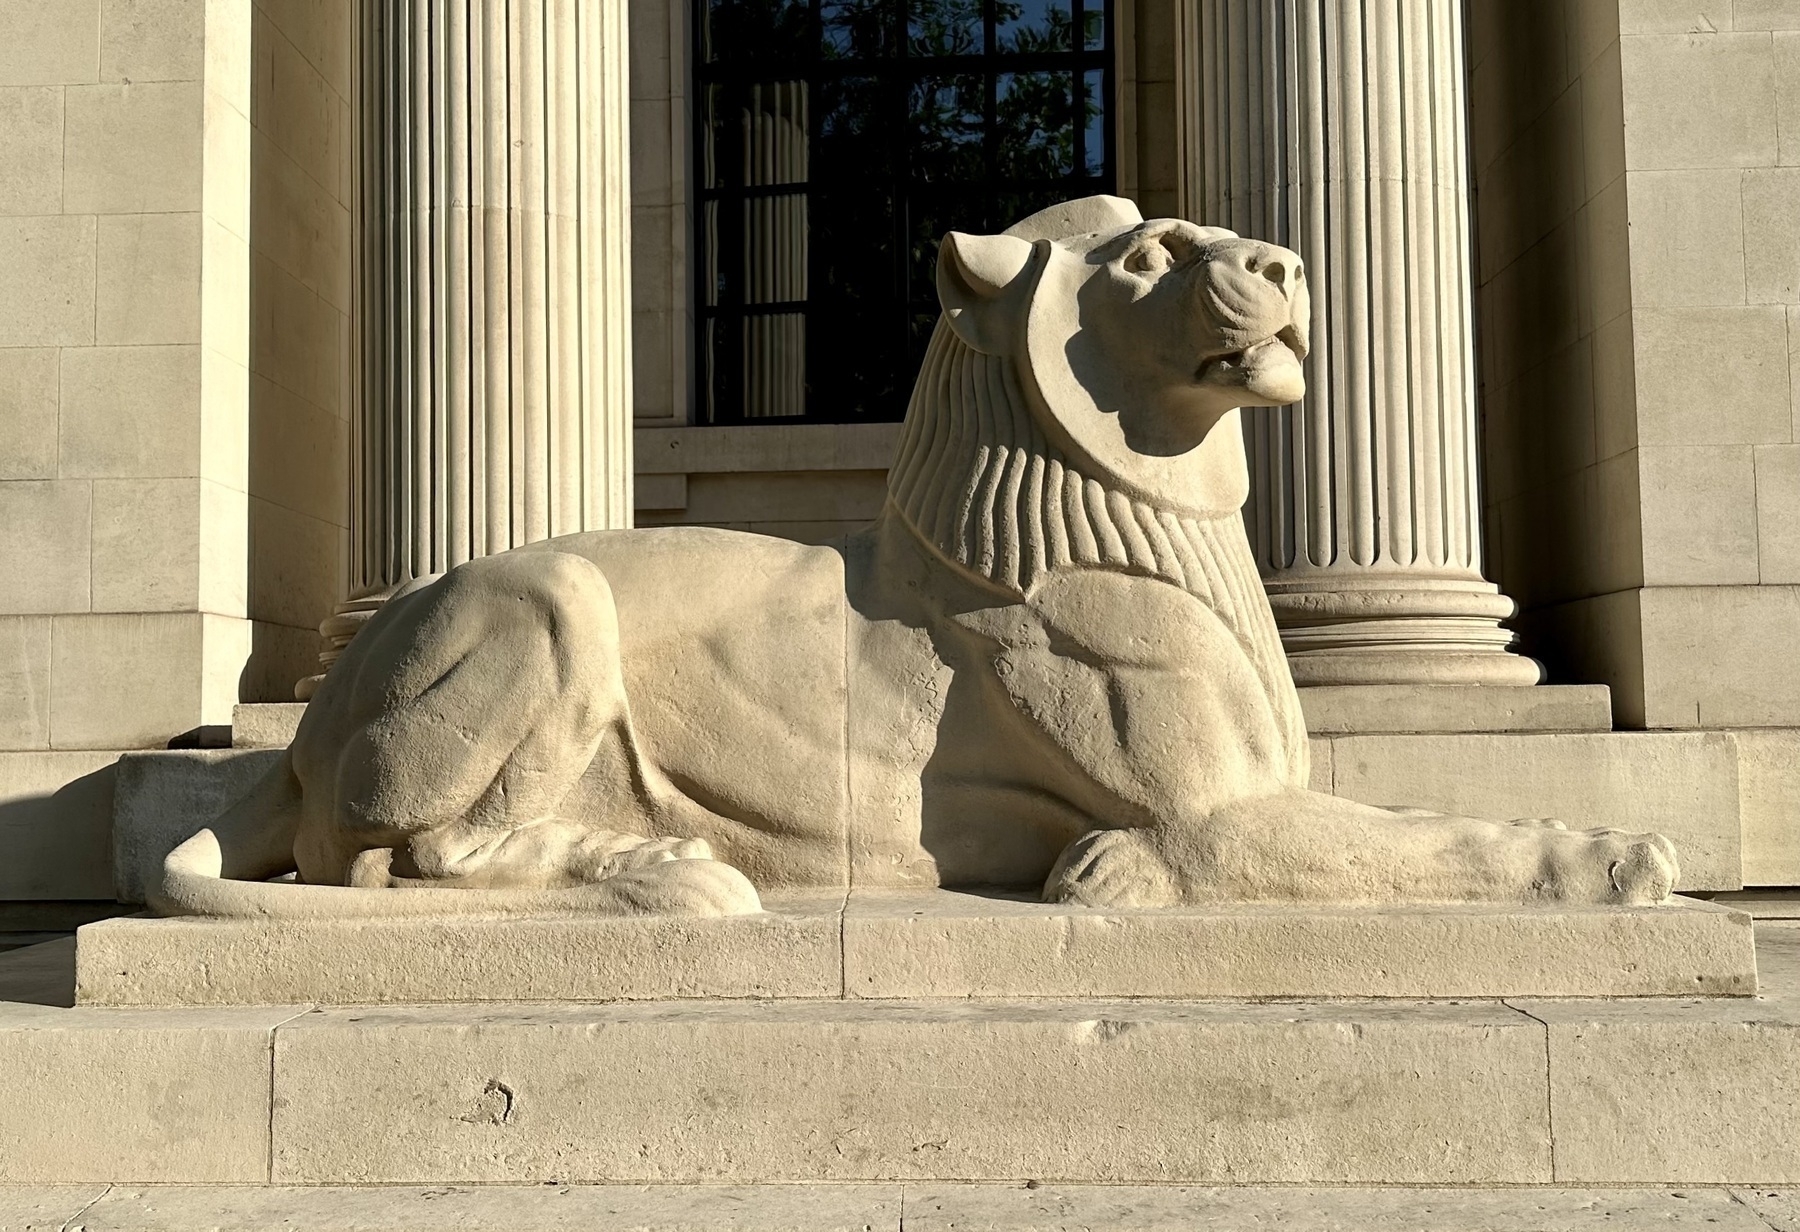 A stone lion, lying down, basking in the evening sun.